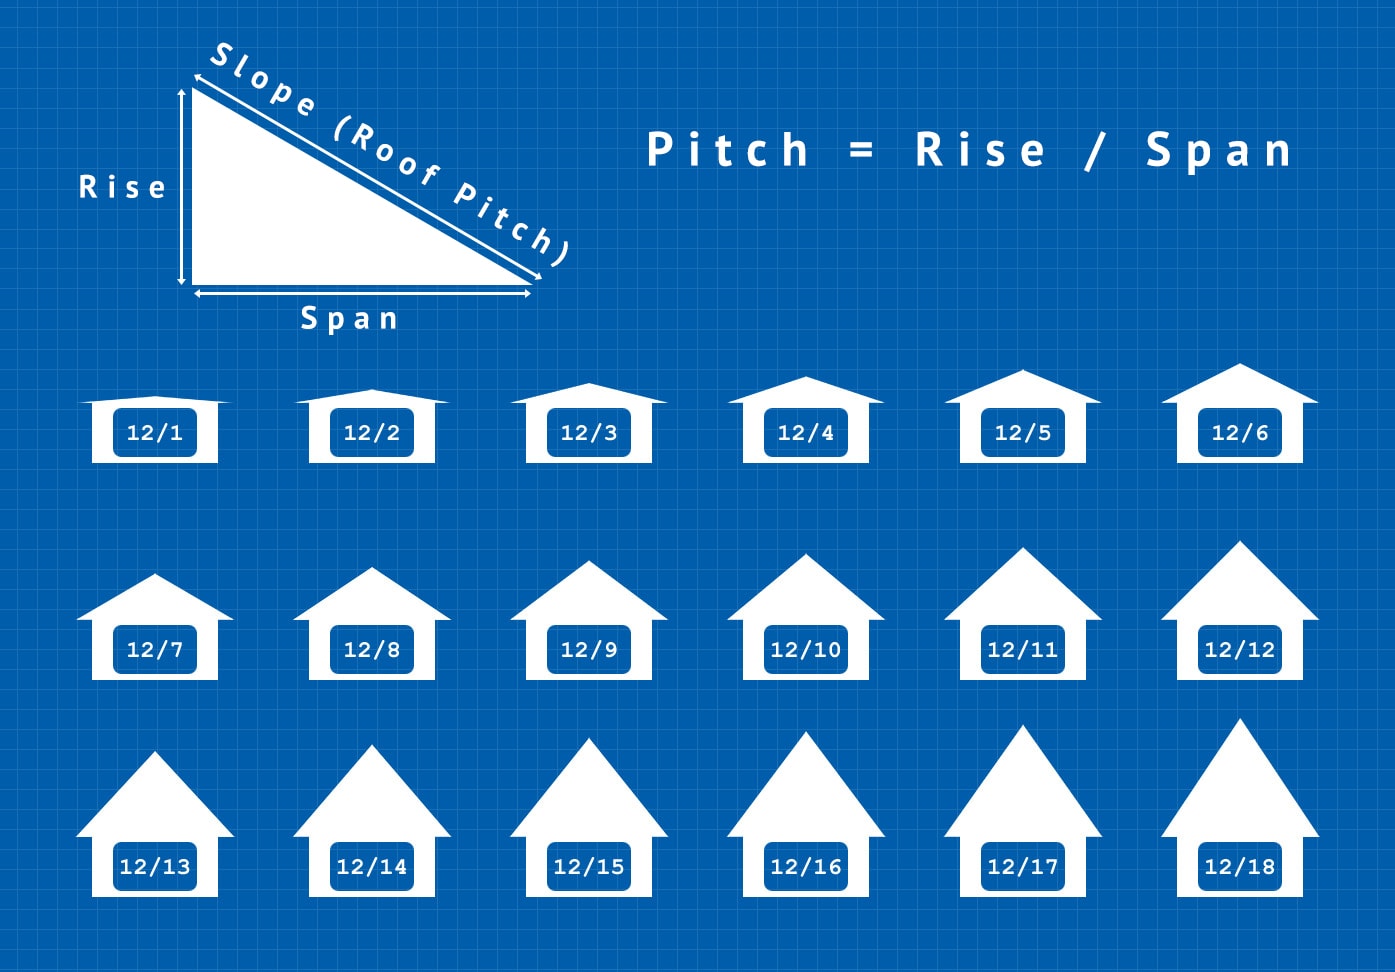 Roof Pitch Diagram